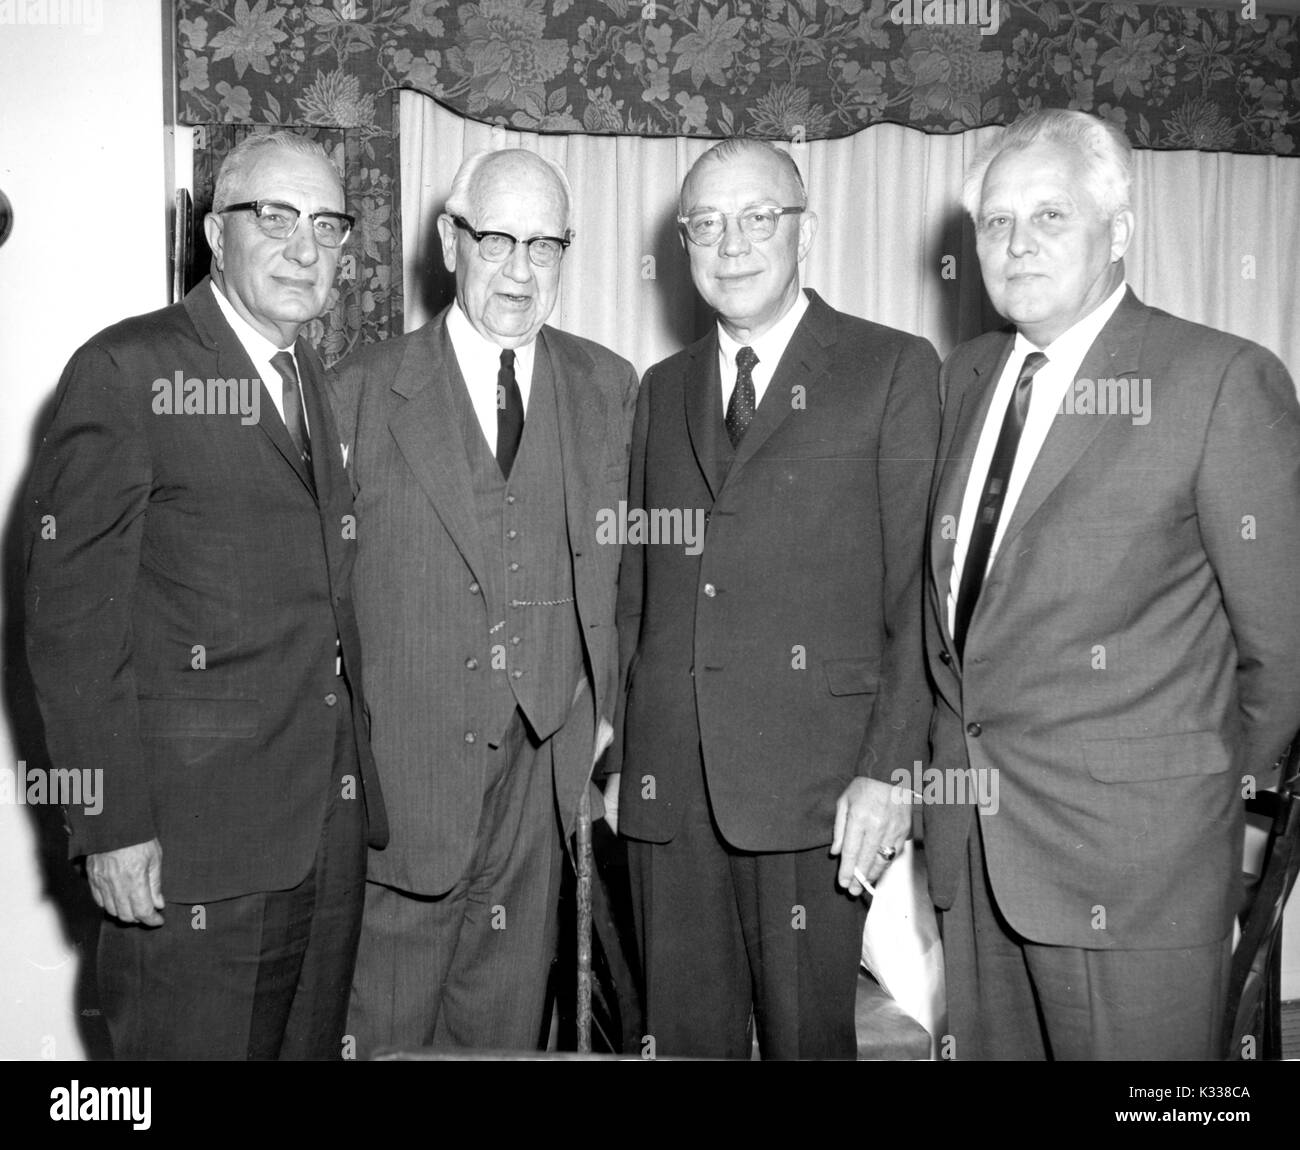 Milton Stover Eisenhower -- President of Johns Hopkins University -- smokes a cigarette while standing to pose for a photograph with Congressmen, everyone wearing suits and all but one in glasses, including Congressmen Harold Ostertag from New York and James Auchincloss from New Jersey, next to famous portrait artist Bjorn Egeli, Baltimore, Maryland, 1966. Stock Photo